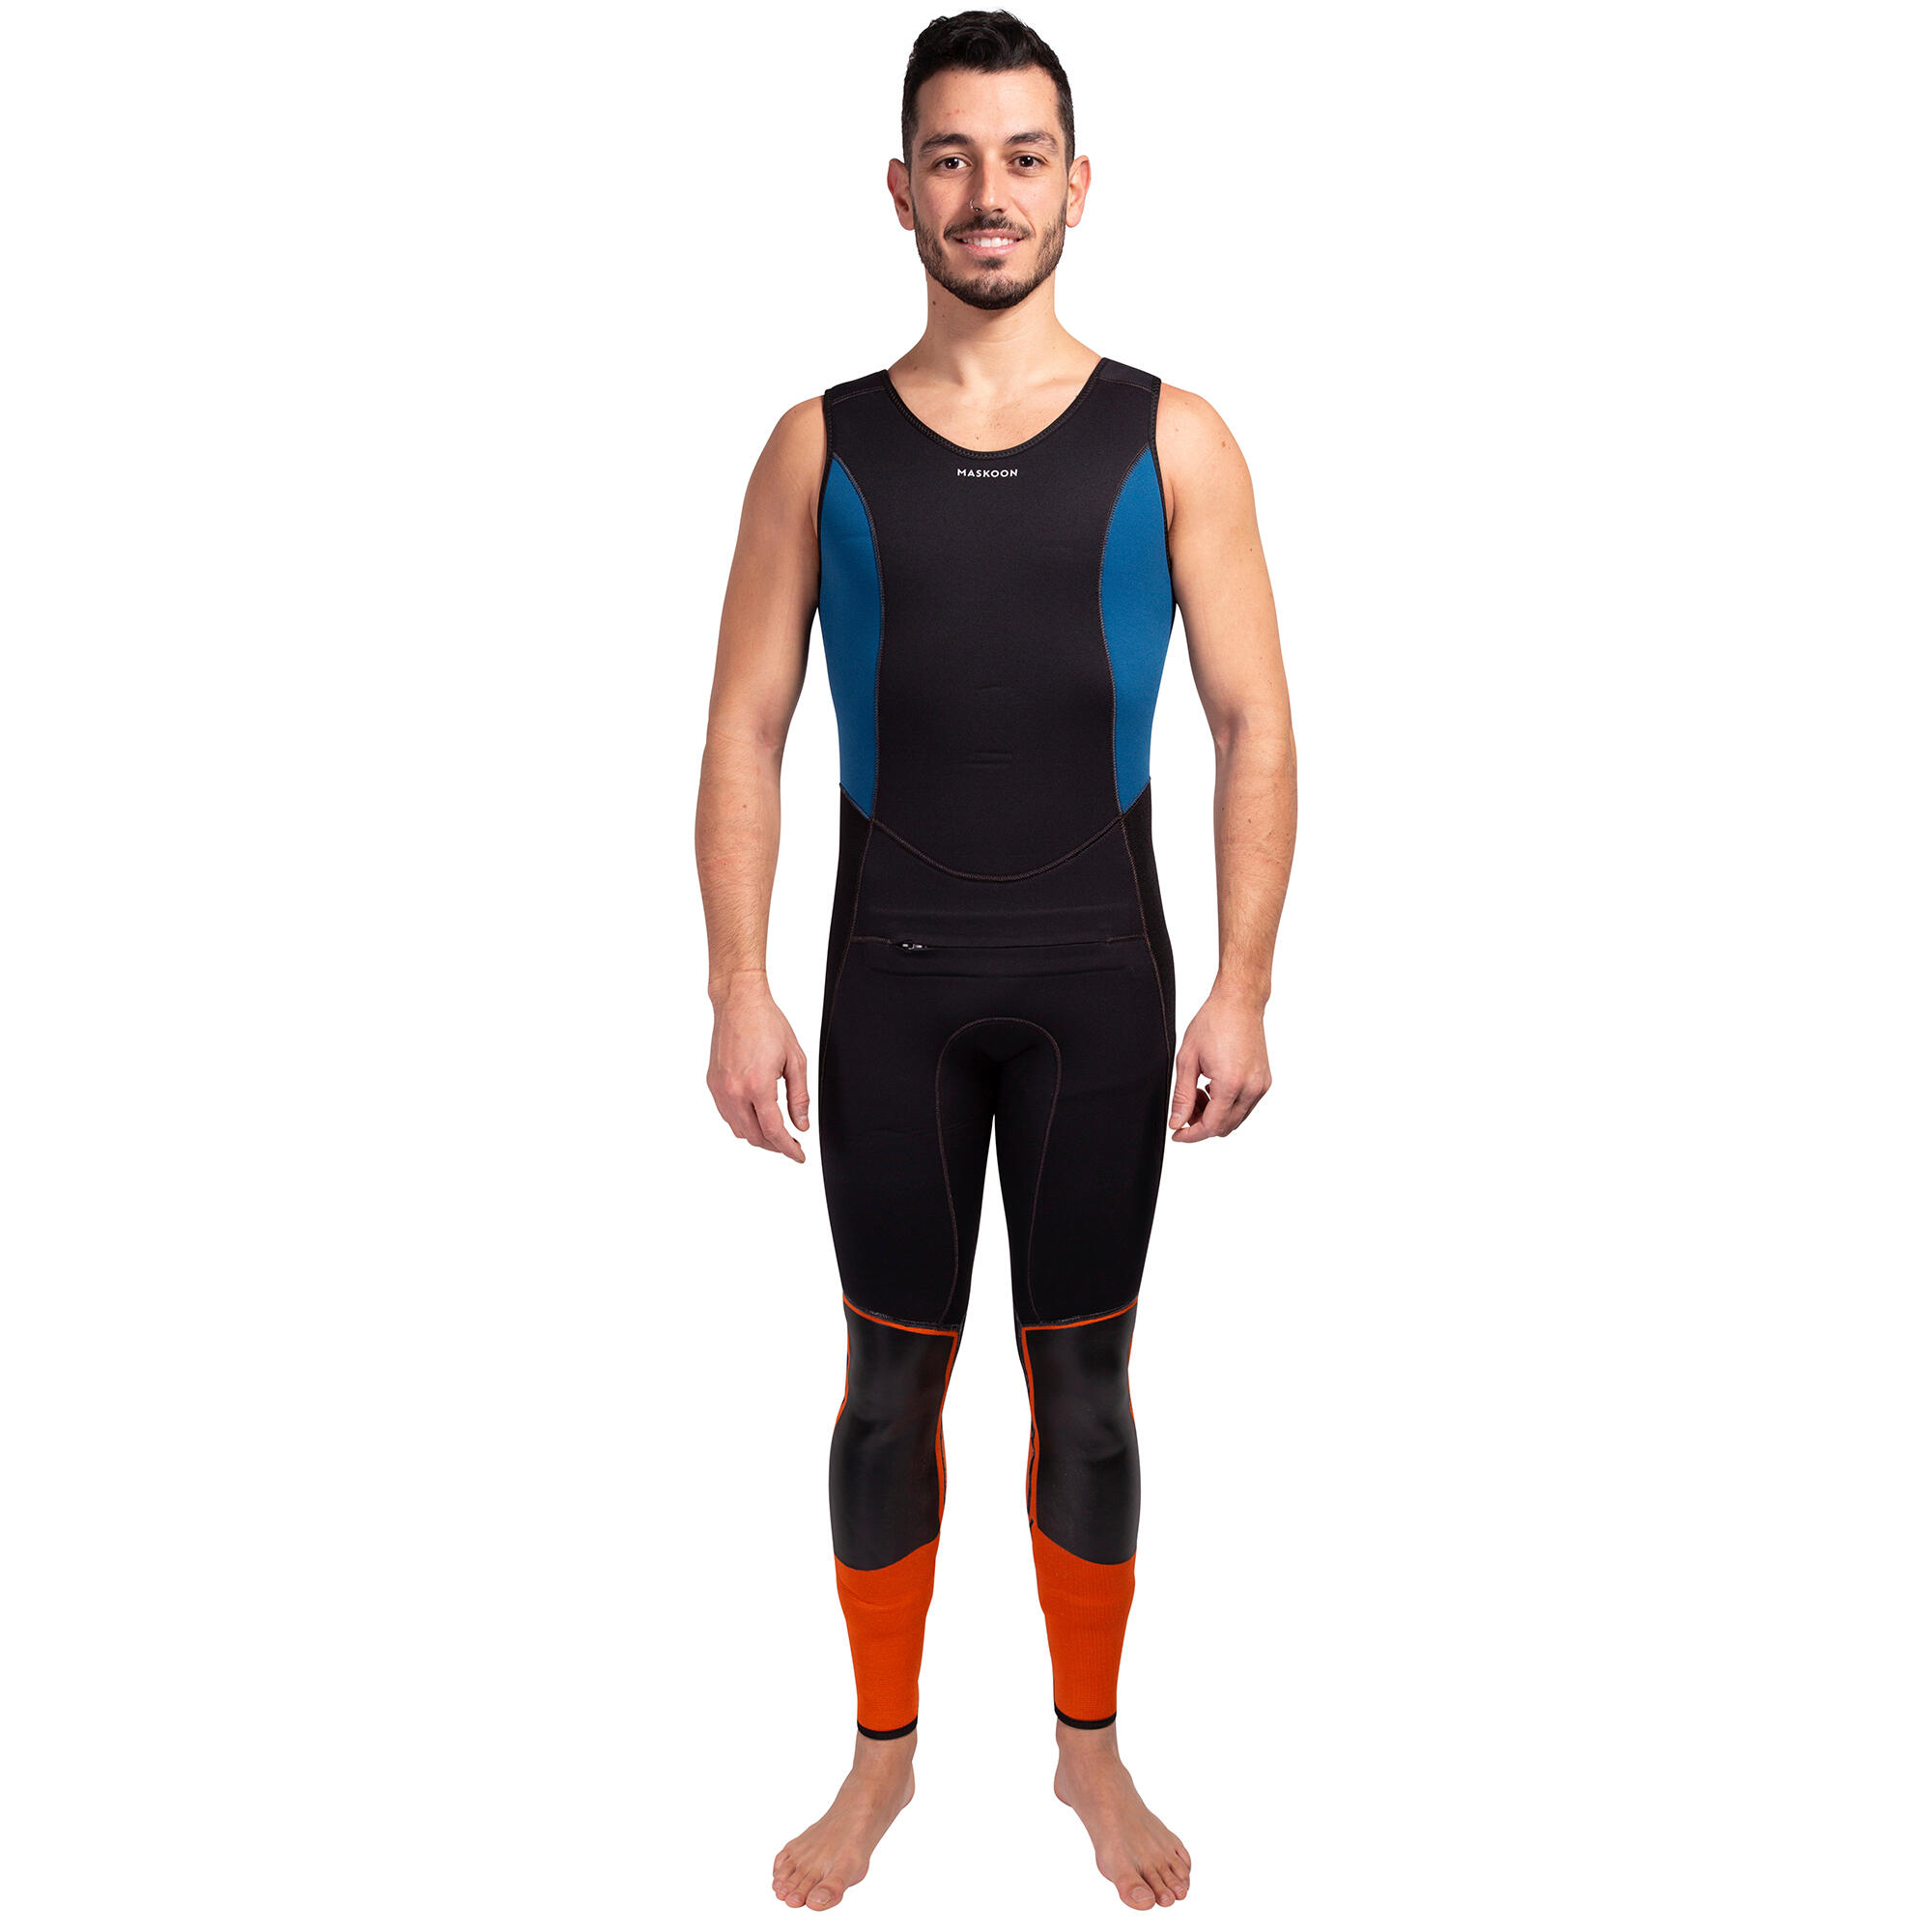 Men's Canyoning Wetsuit Trousers 5 mm - MK 500 9/19